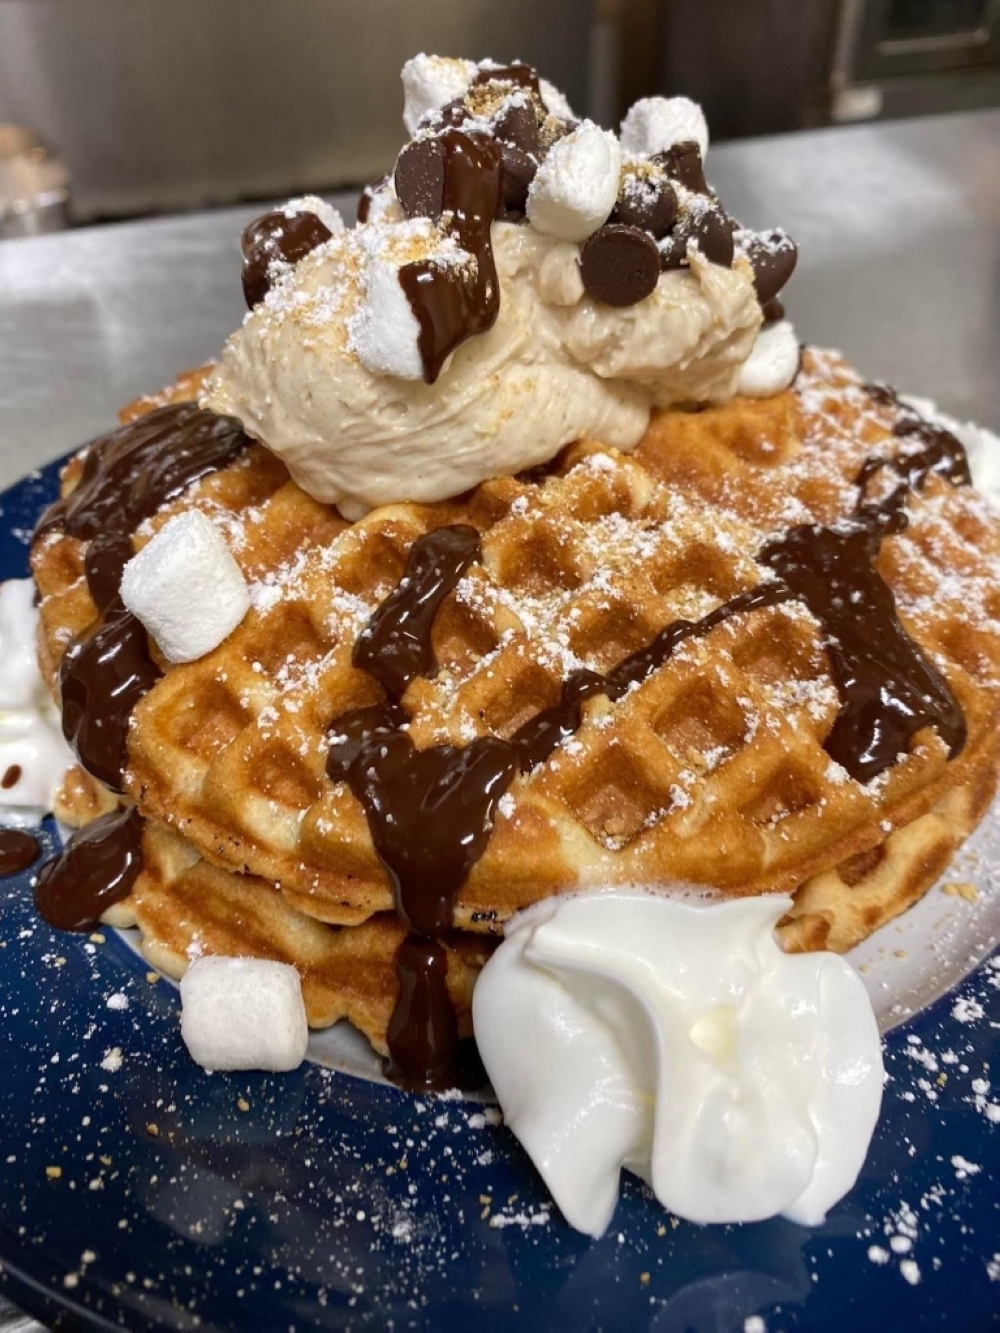 Comfort Cafe On The Go will offer gourmet Belgian waffles. (Courtesy Comfort Cafe)